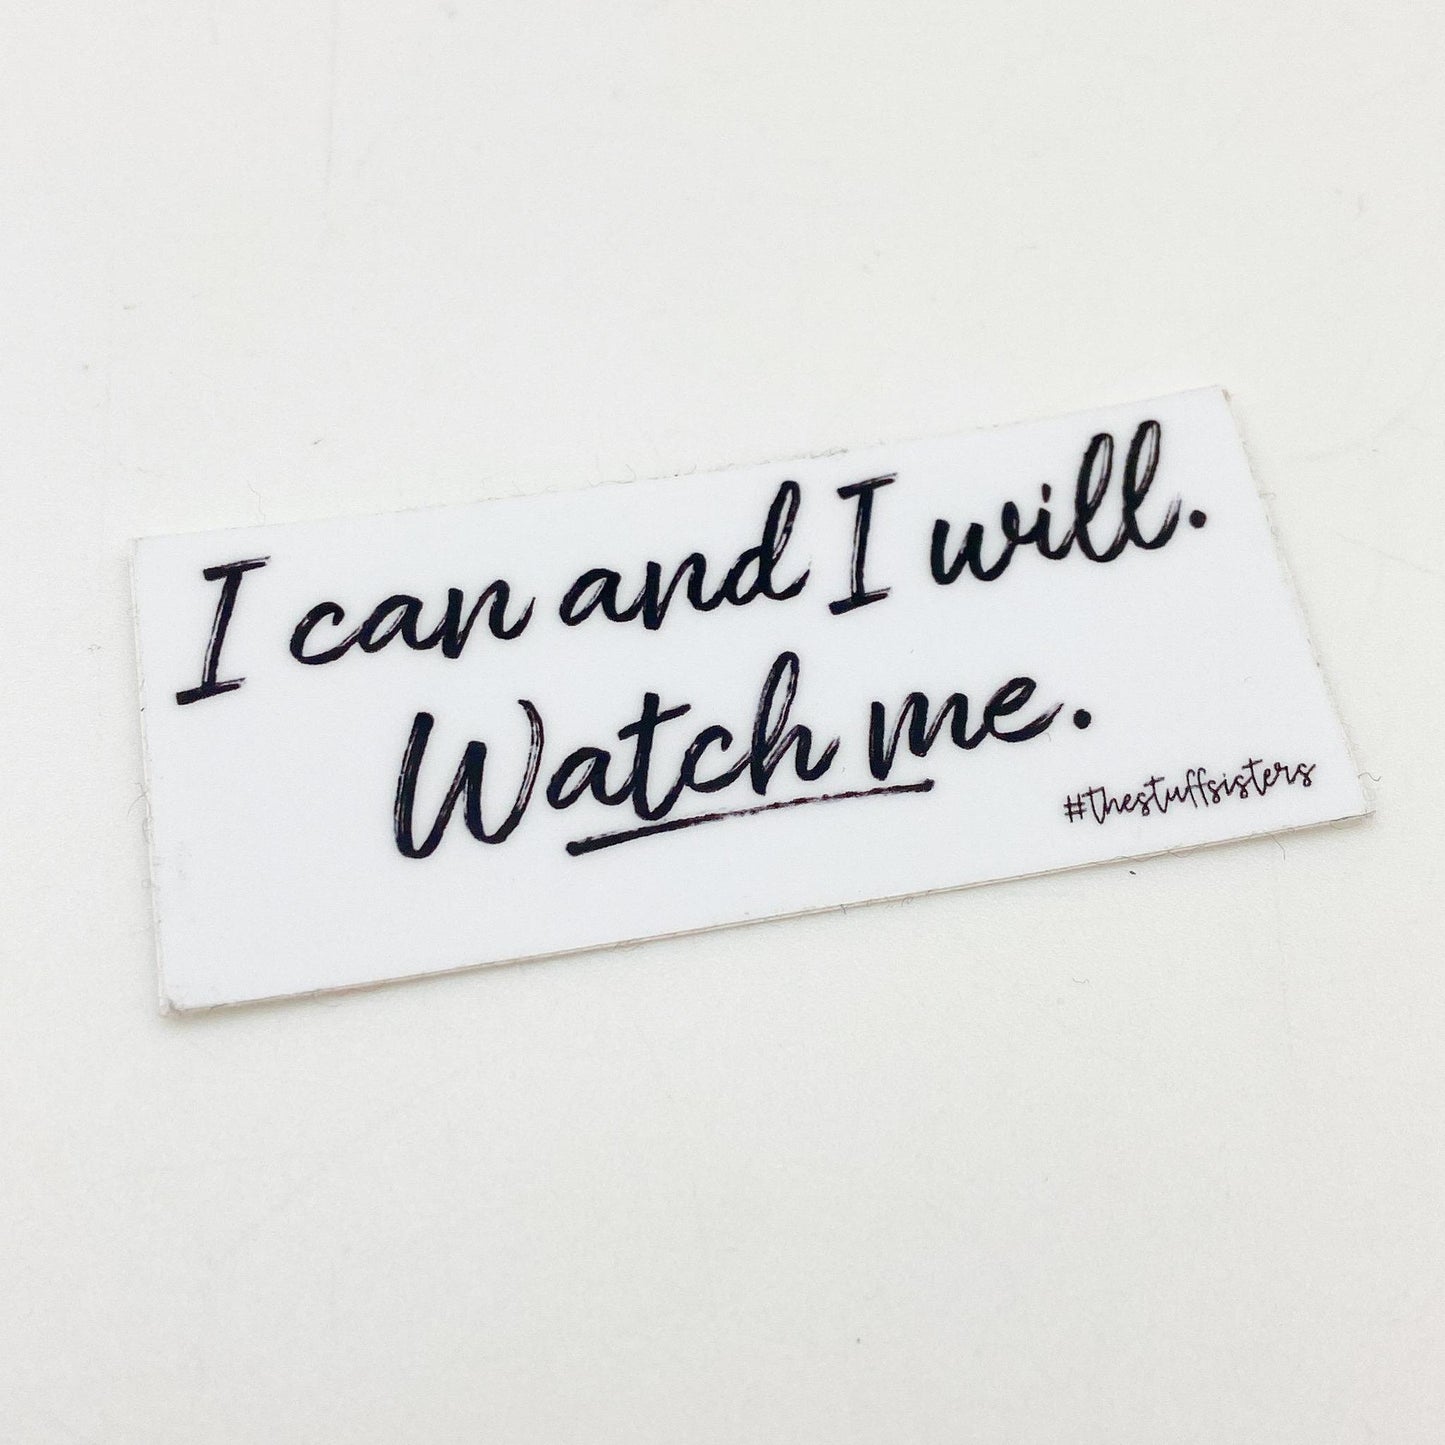 Sticker - "I Can And I Will. Watch Me."